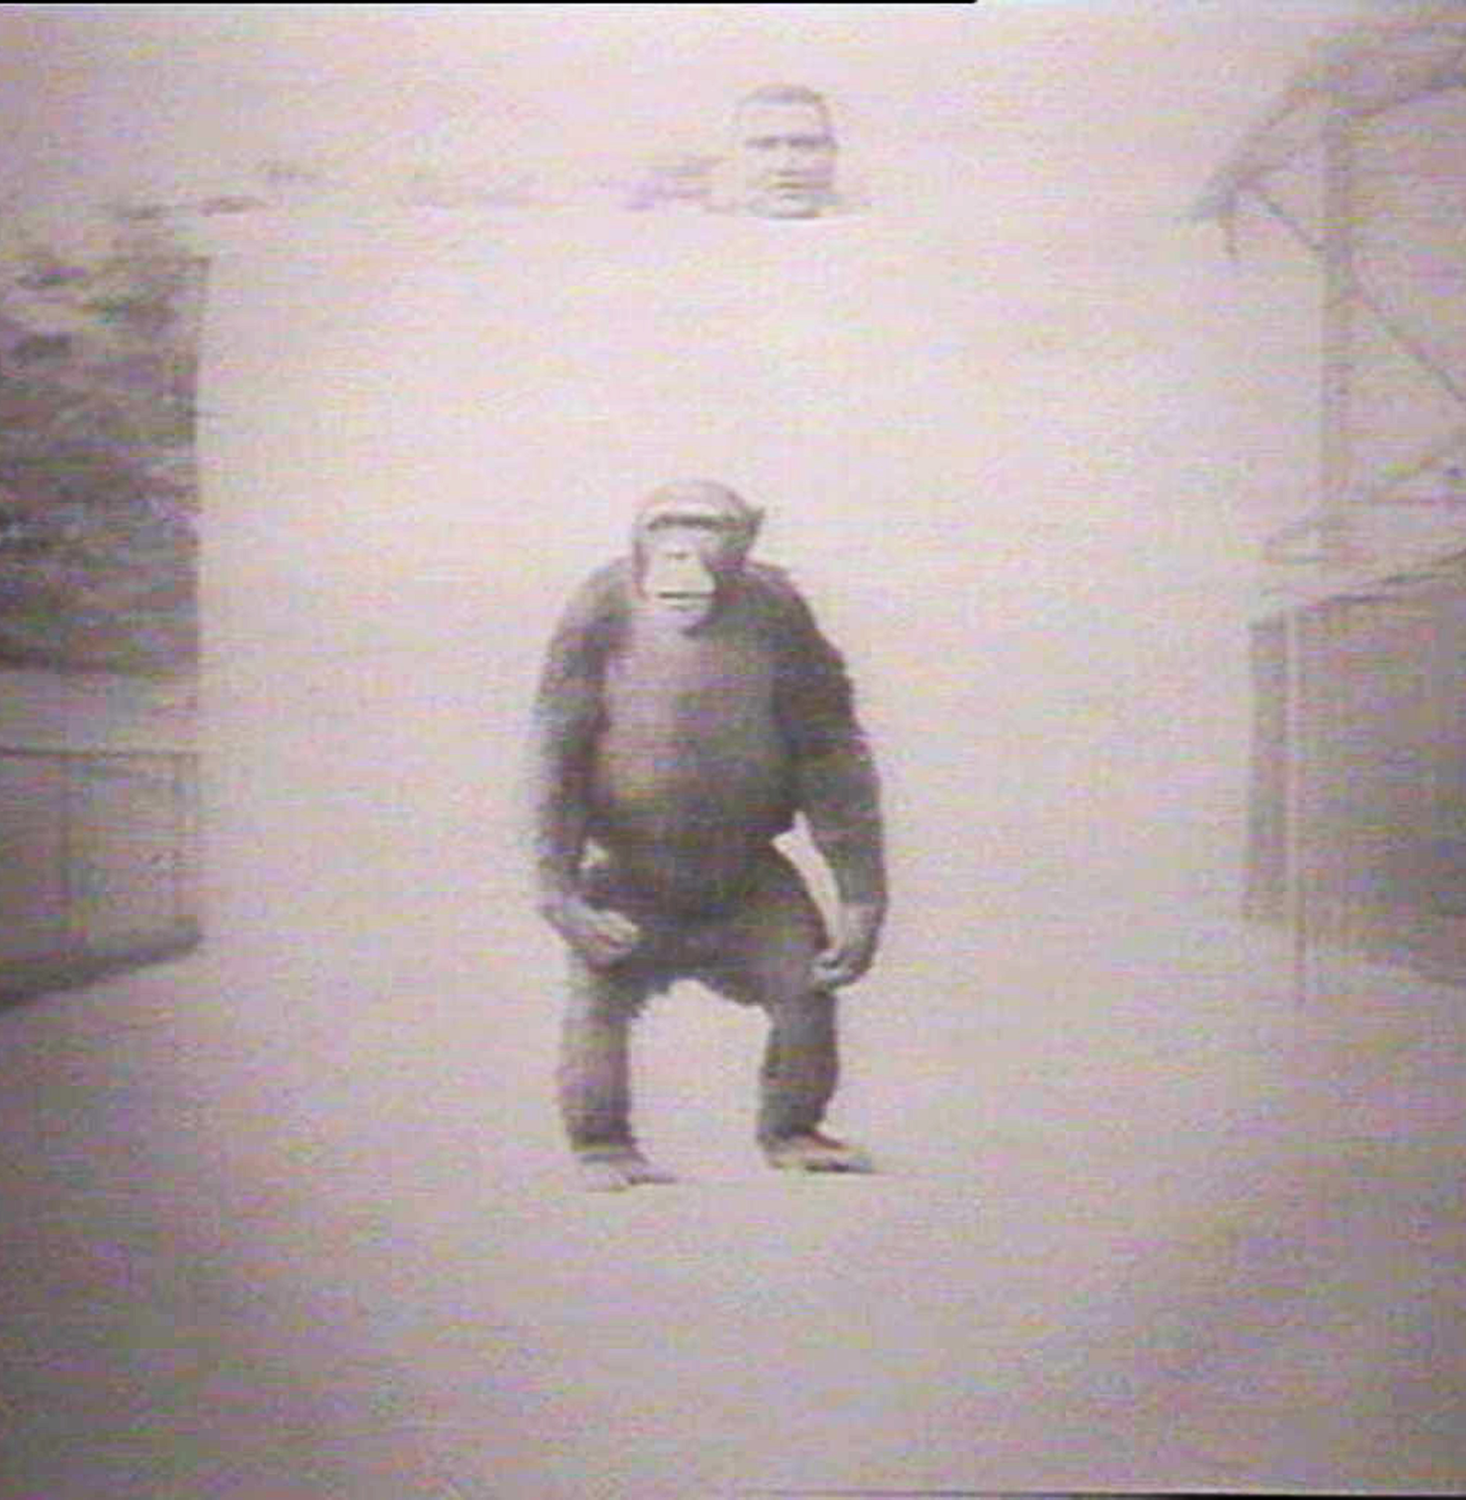 Archival image of an orang-utan in front of a white backdrop held up by a man, with the zoo visible on either side of the backdrop